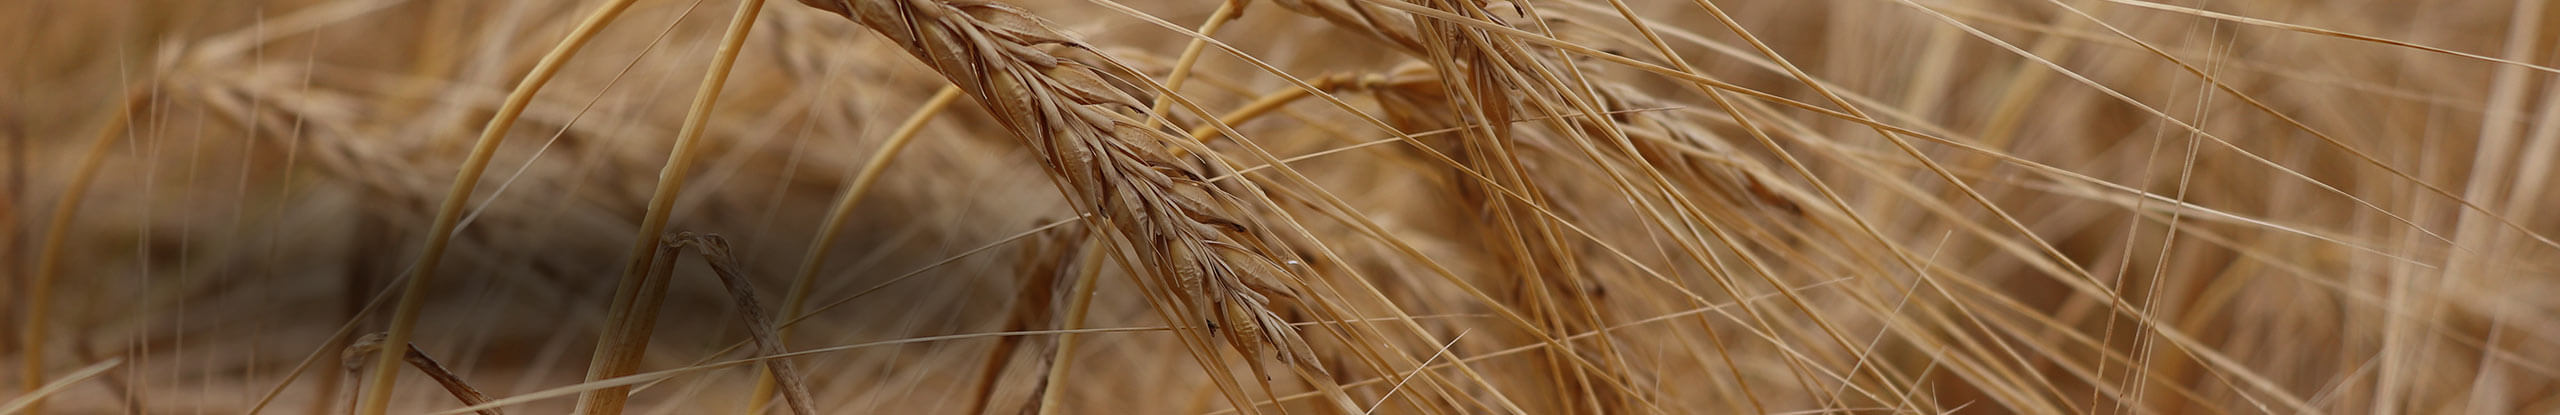 Seed treatments in wheat, barley and flax: what they are, how they work and when they should be used